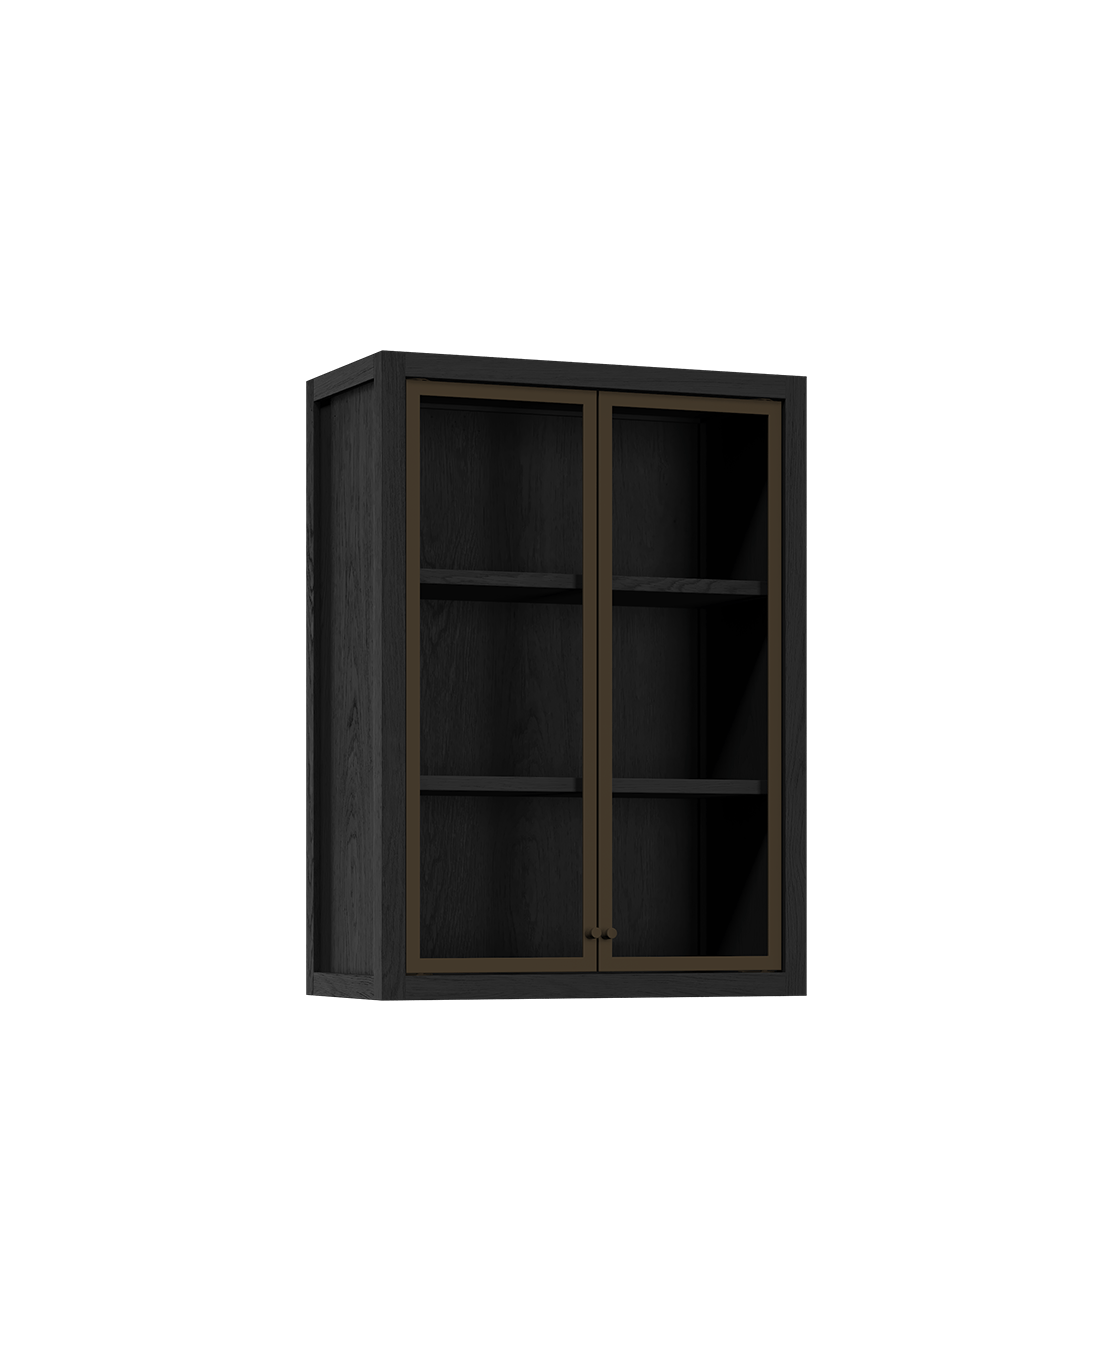 Coquo modular upper kitchen cabinet in black stained oak with glass doors.